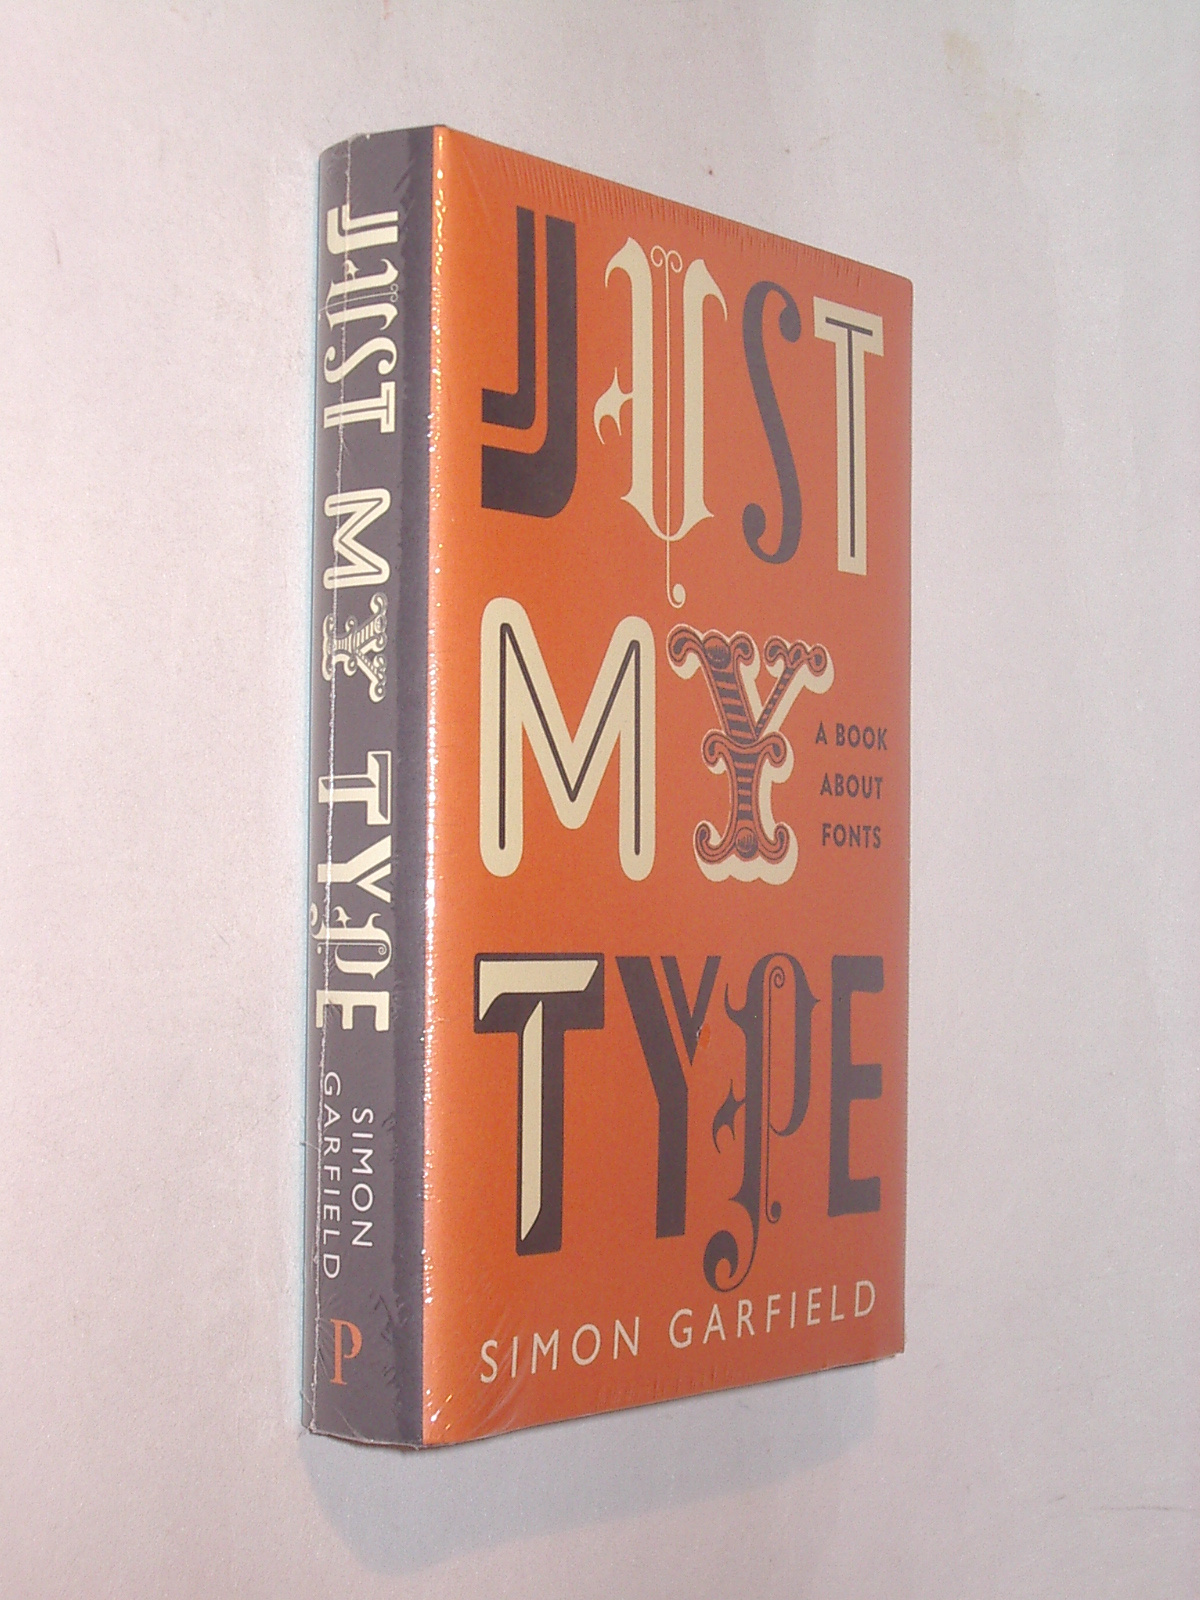 HC　2010　Fonts　My　Garfield　About　Simon　Type　Book　A　Just　Books